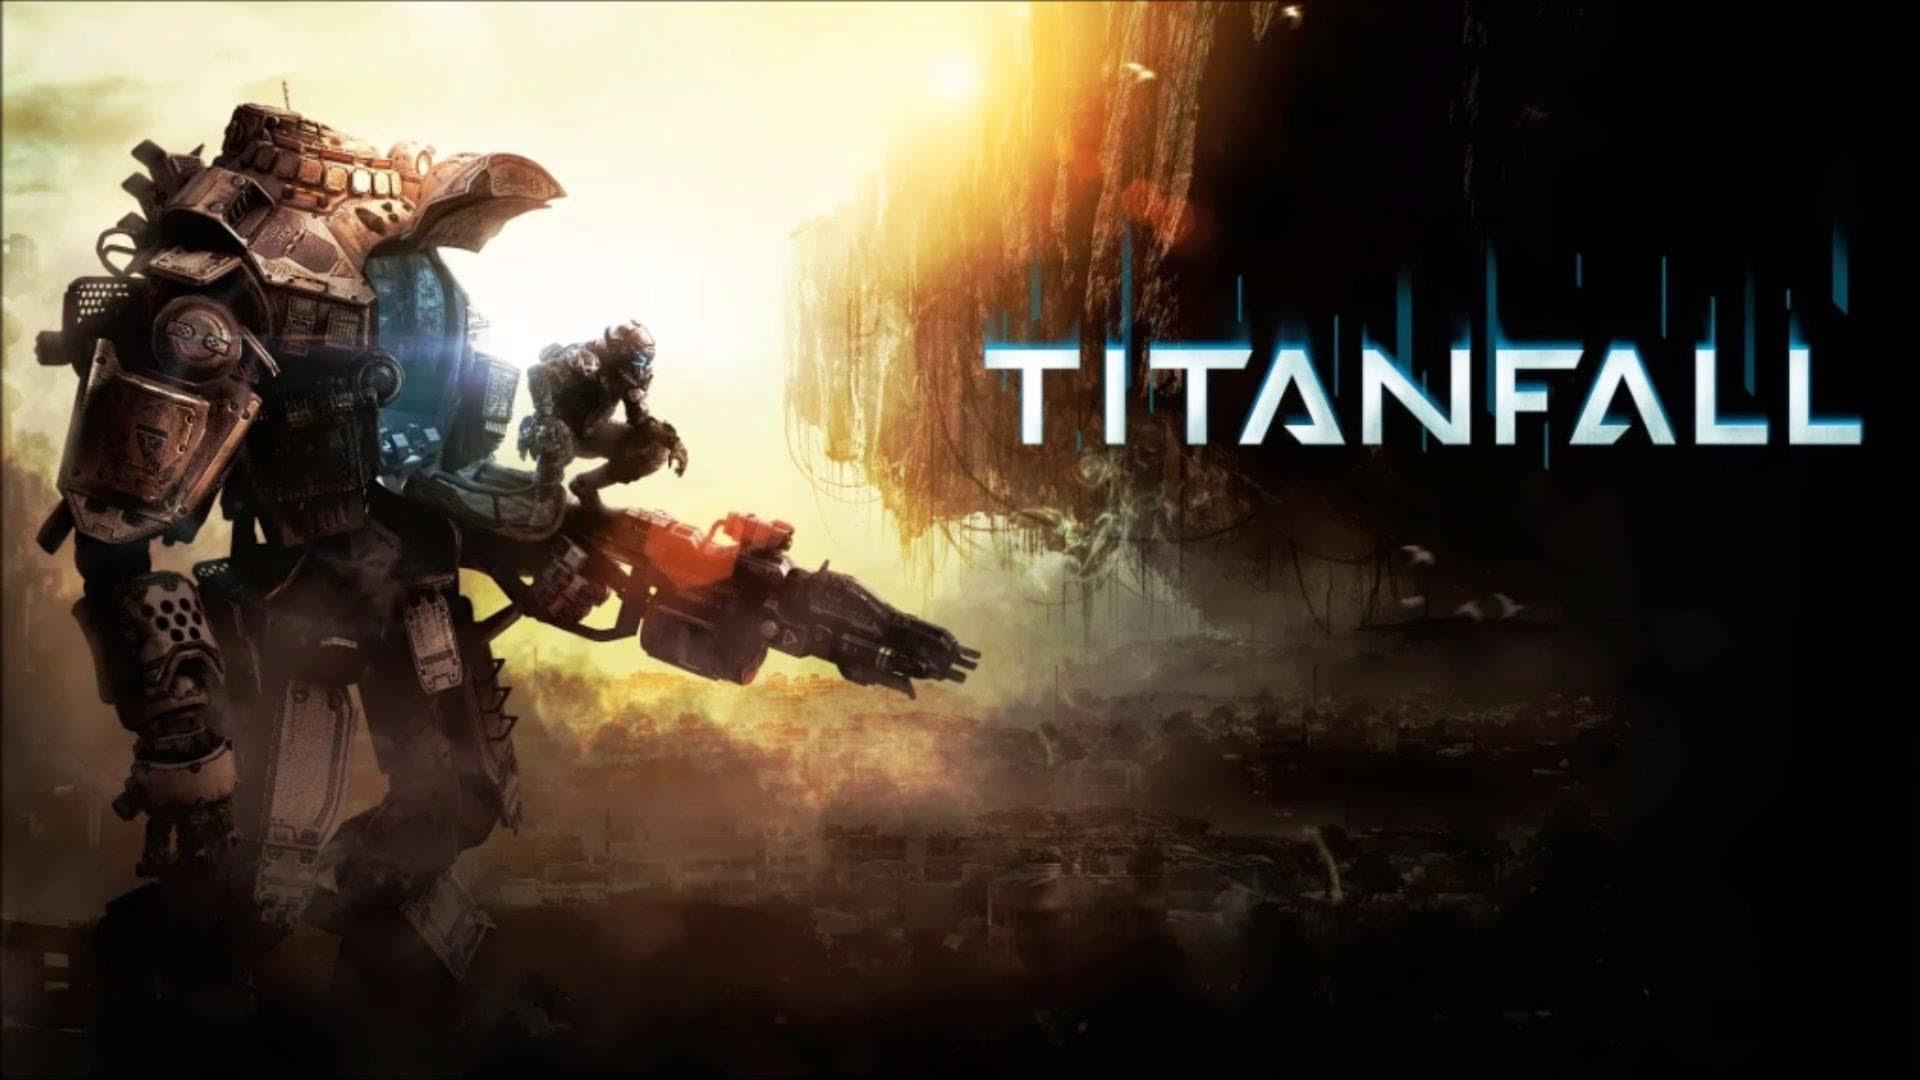 Titanfall-Game-Update-9-Is-Live-on-Xbox-One-and-PC-469277-2.jpg